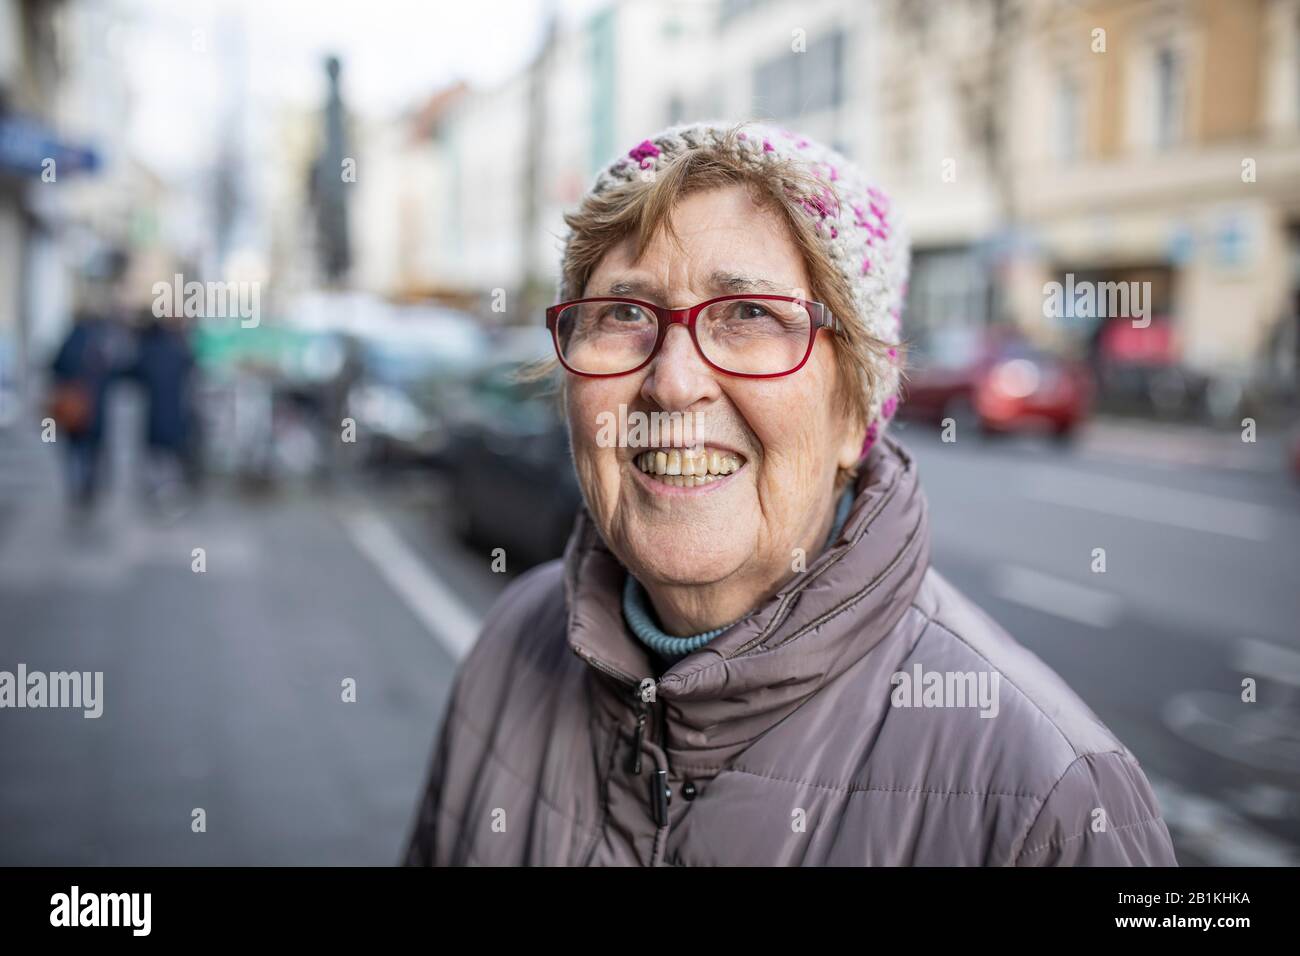 Senior citizen with glasses and cap, portrait in the city, Cologne, North Rhine-Westphalia, Germany Stock Photo